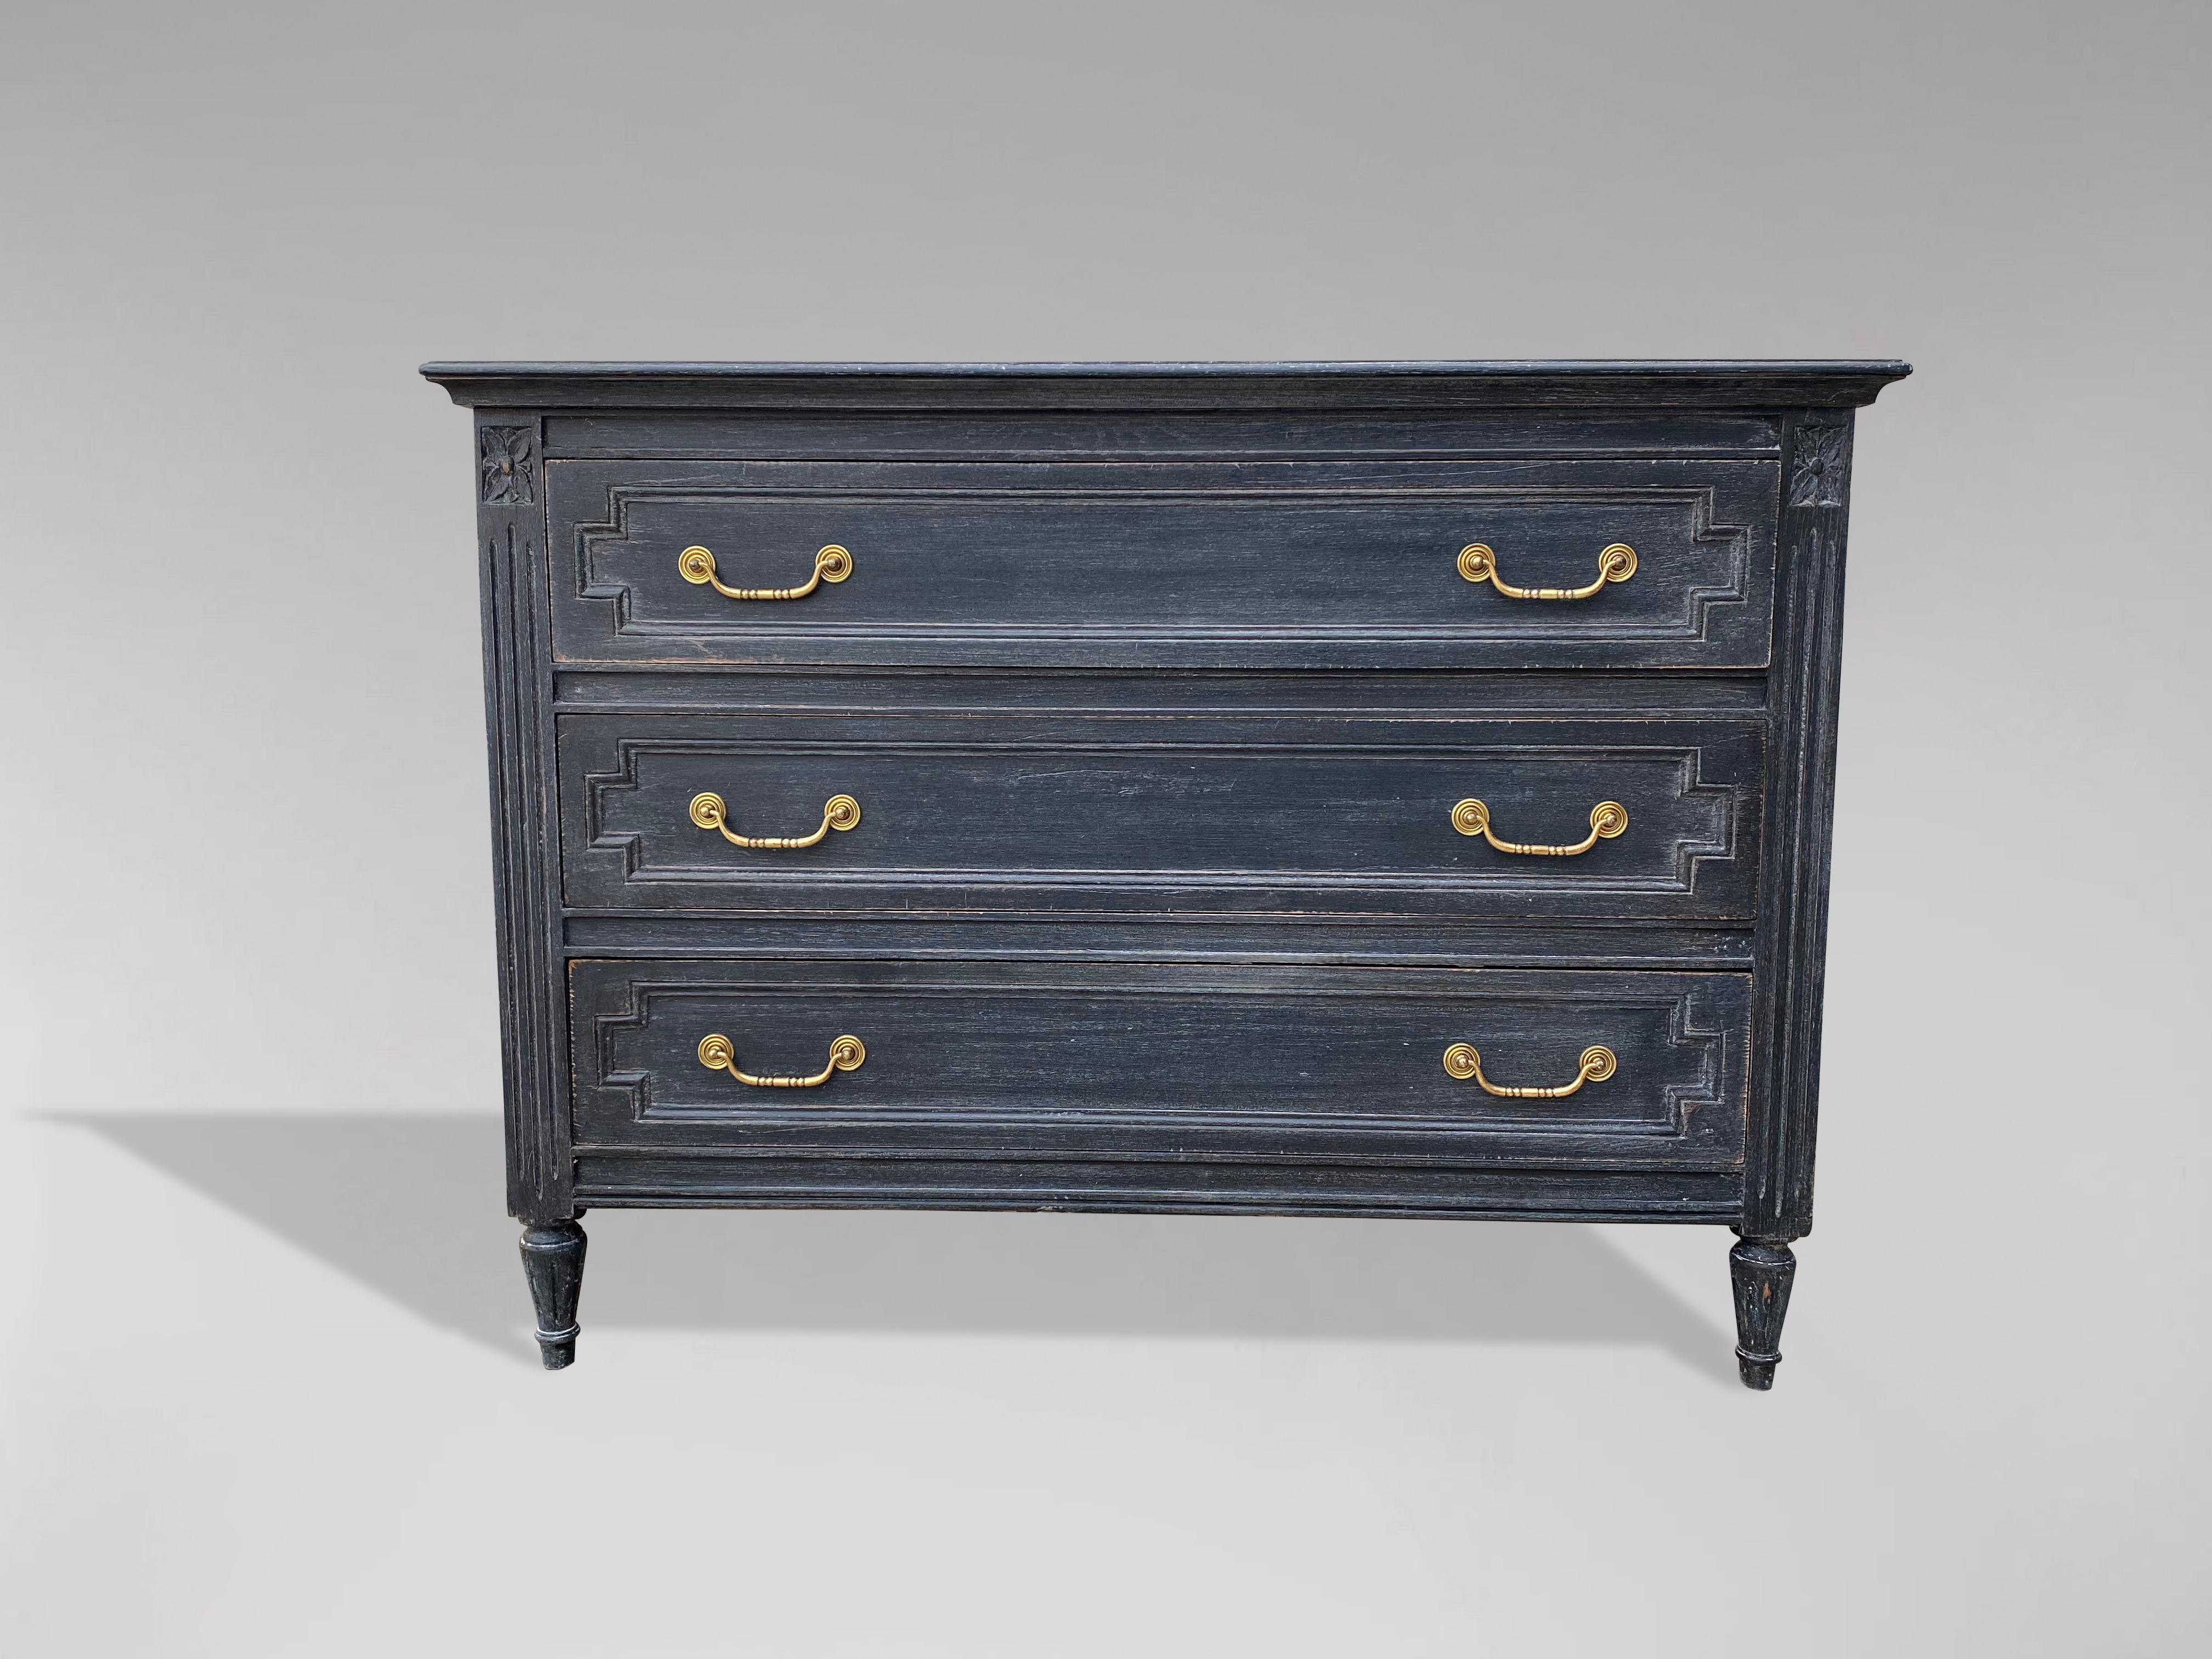 19th Century French Louis XVI Painted Commode In Good Condition For Sale In Petworth,West Sussex, GB